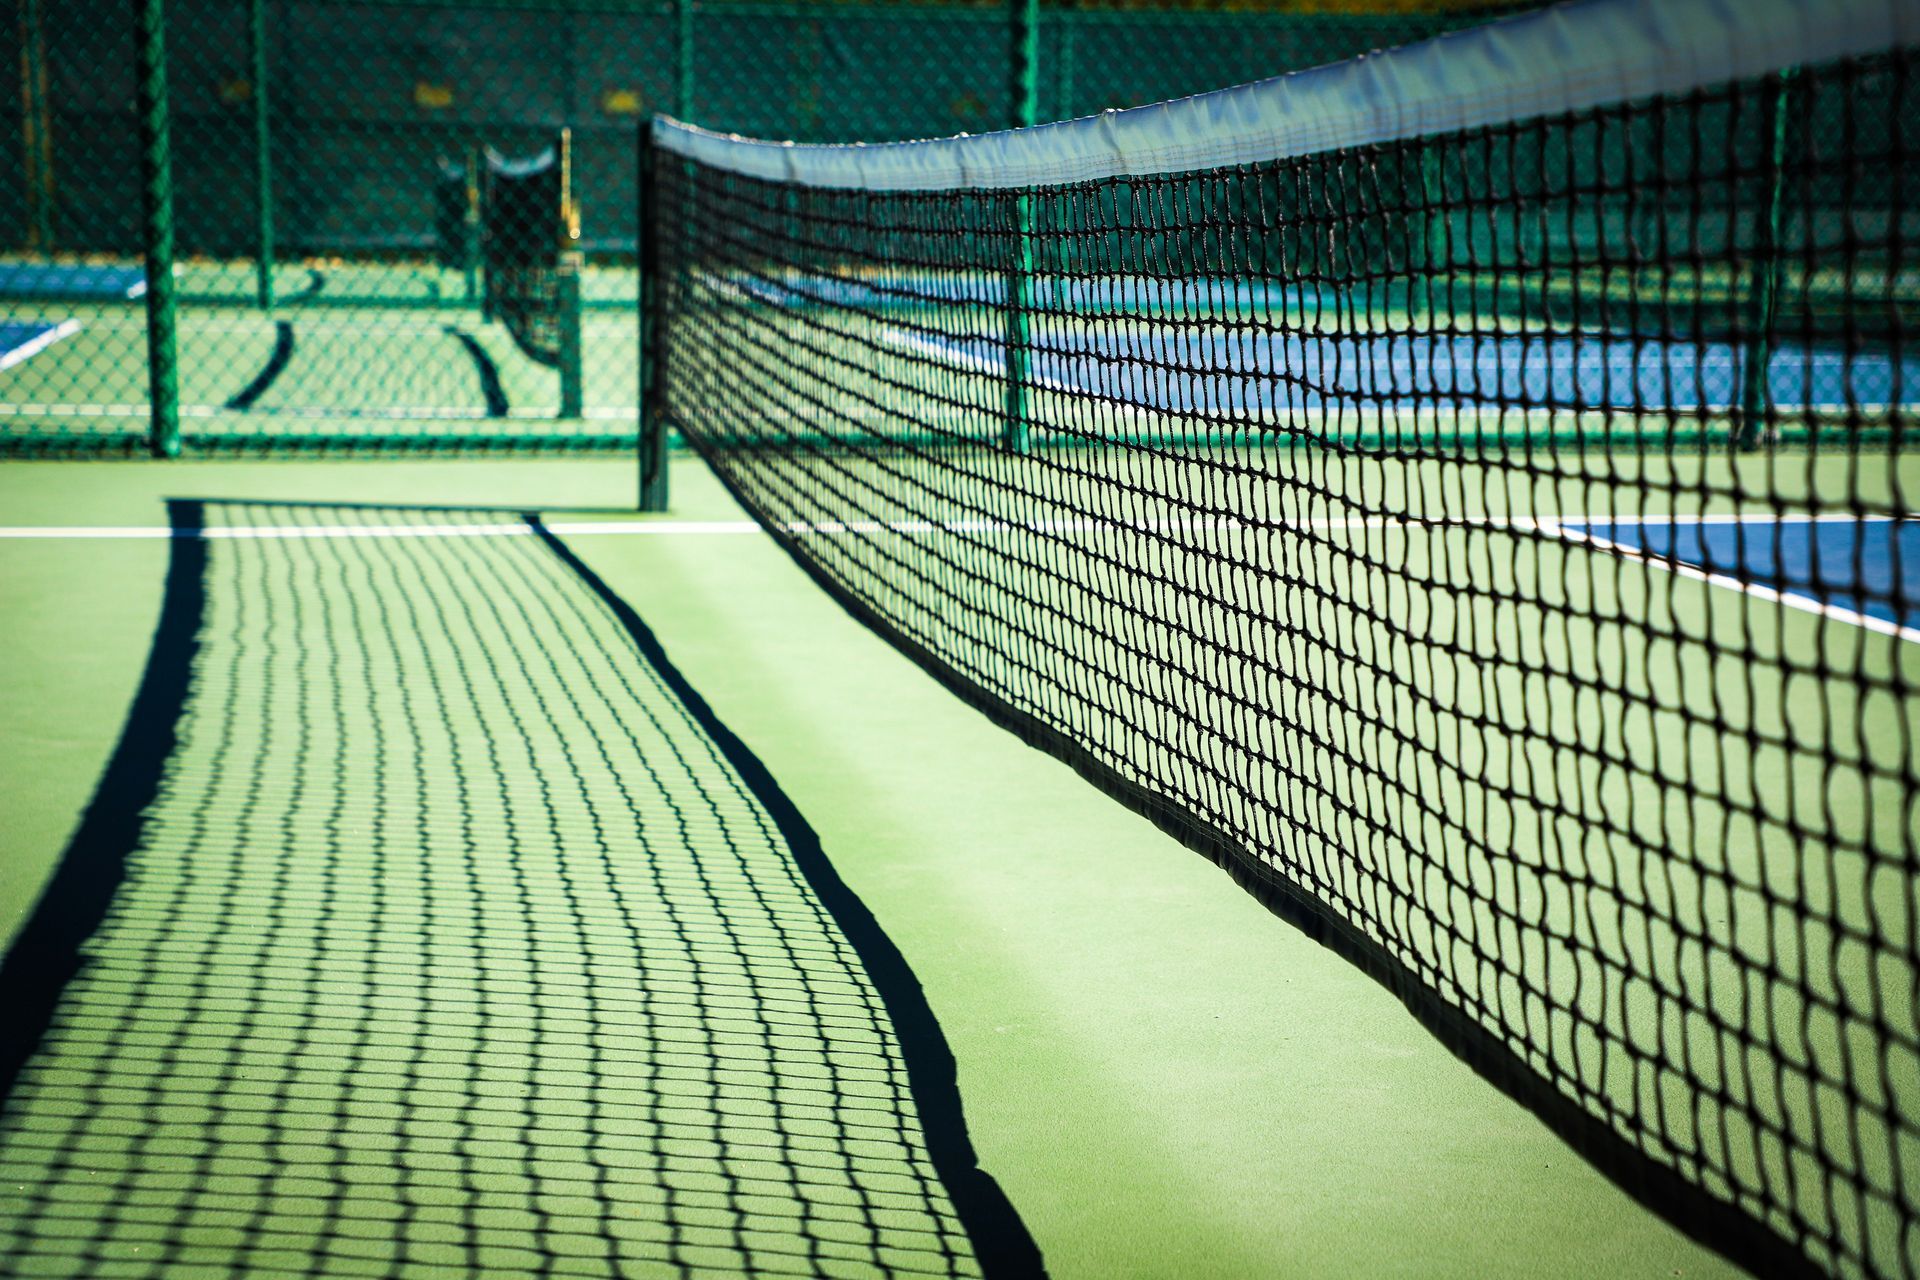 A tennis and pickleball court with a net and a chair in the background.